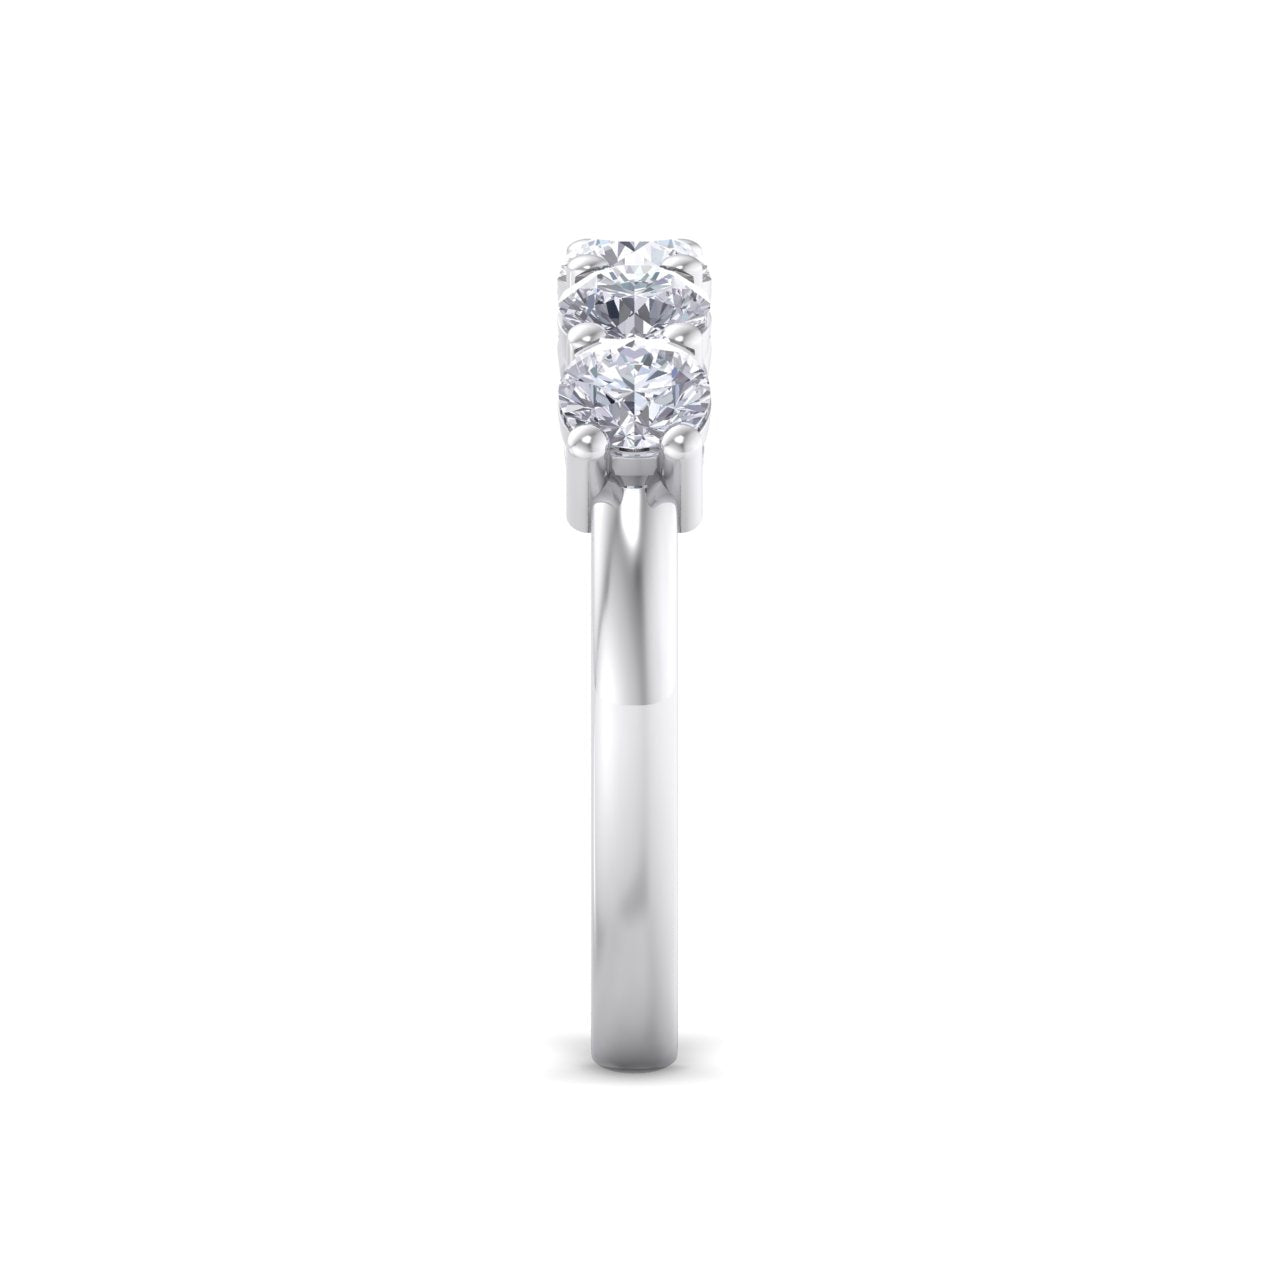 Wedding ring in white gold with white diamonds of 1.45 ct in weight